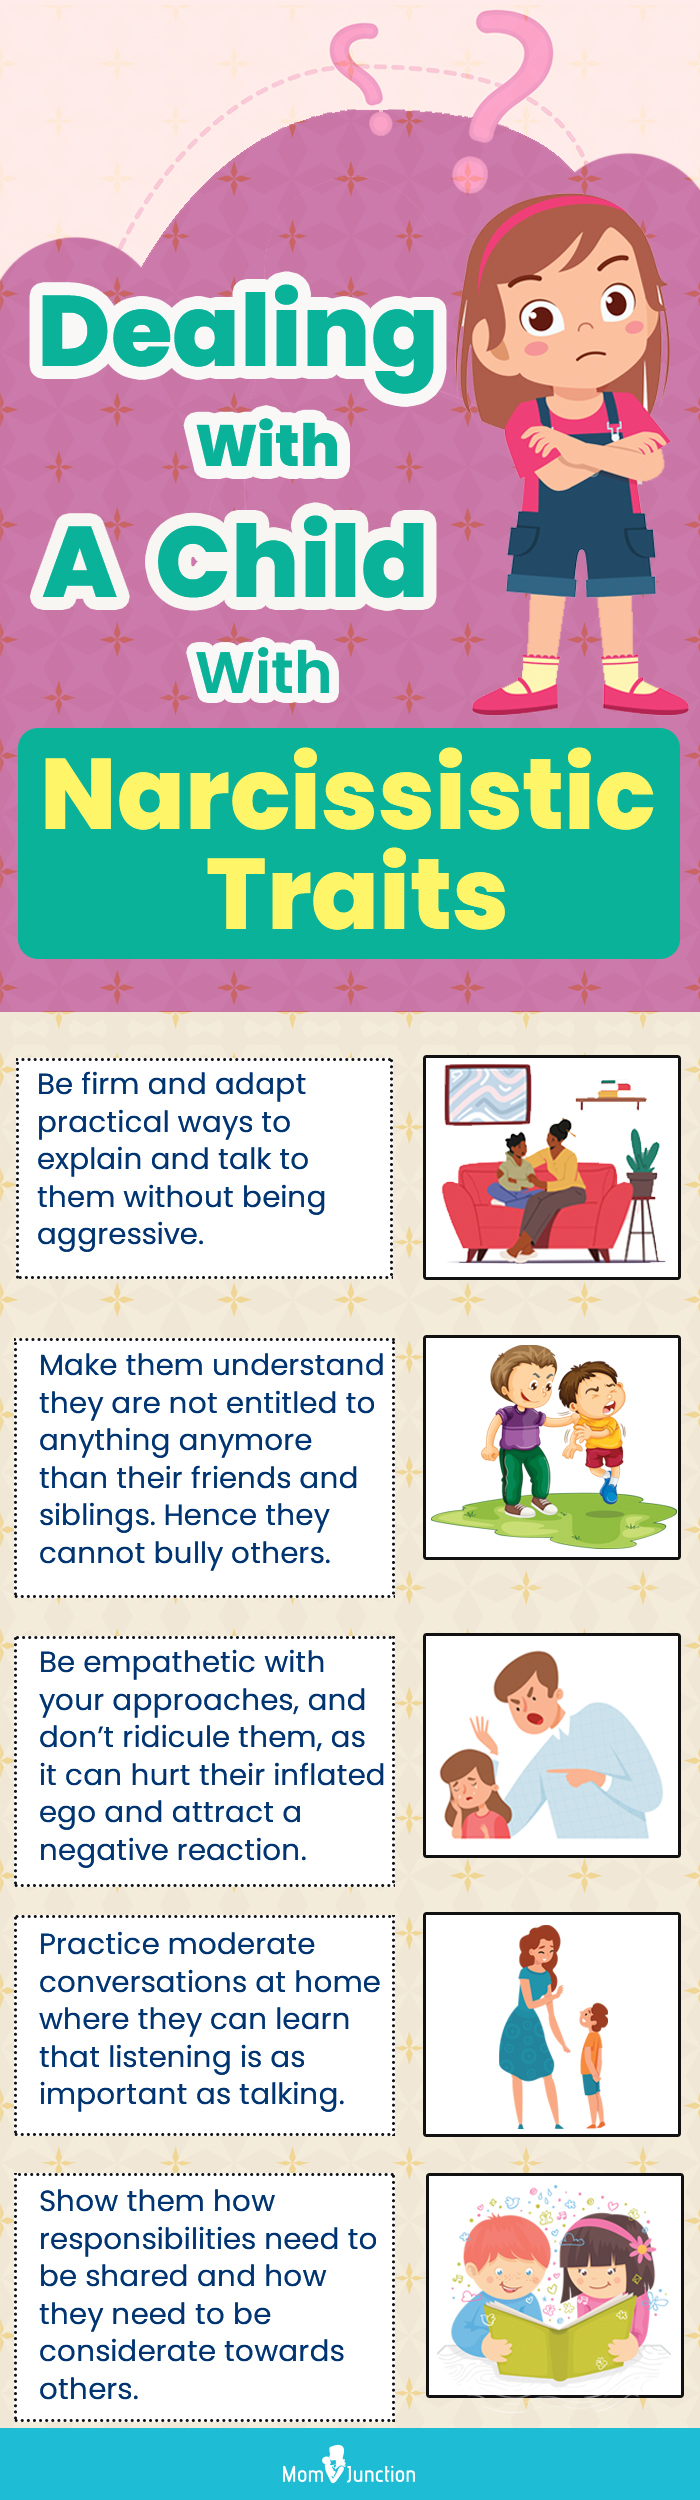 dealing with a child with narcissistic traits [infographic]